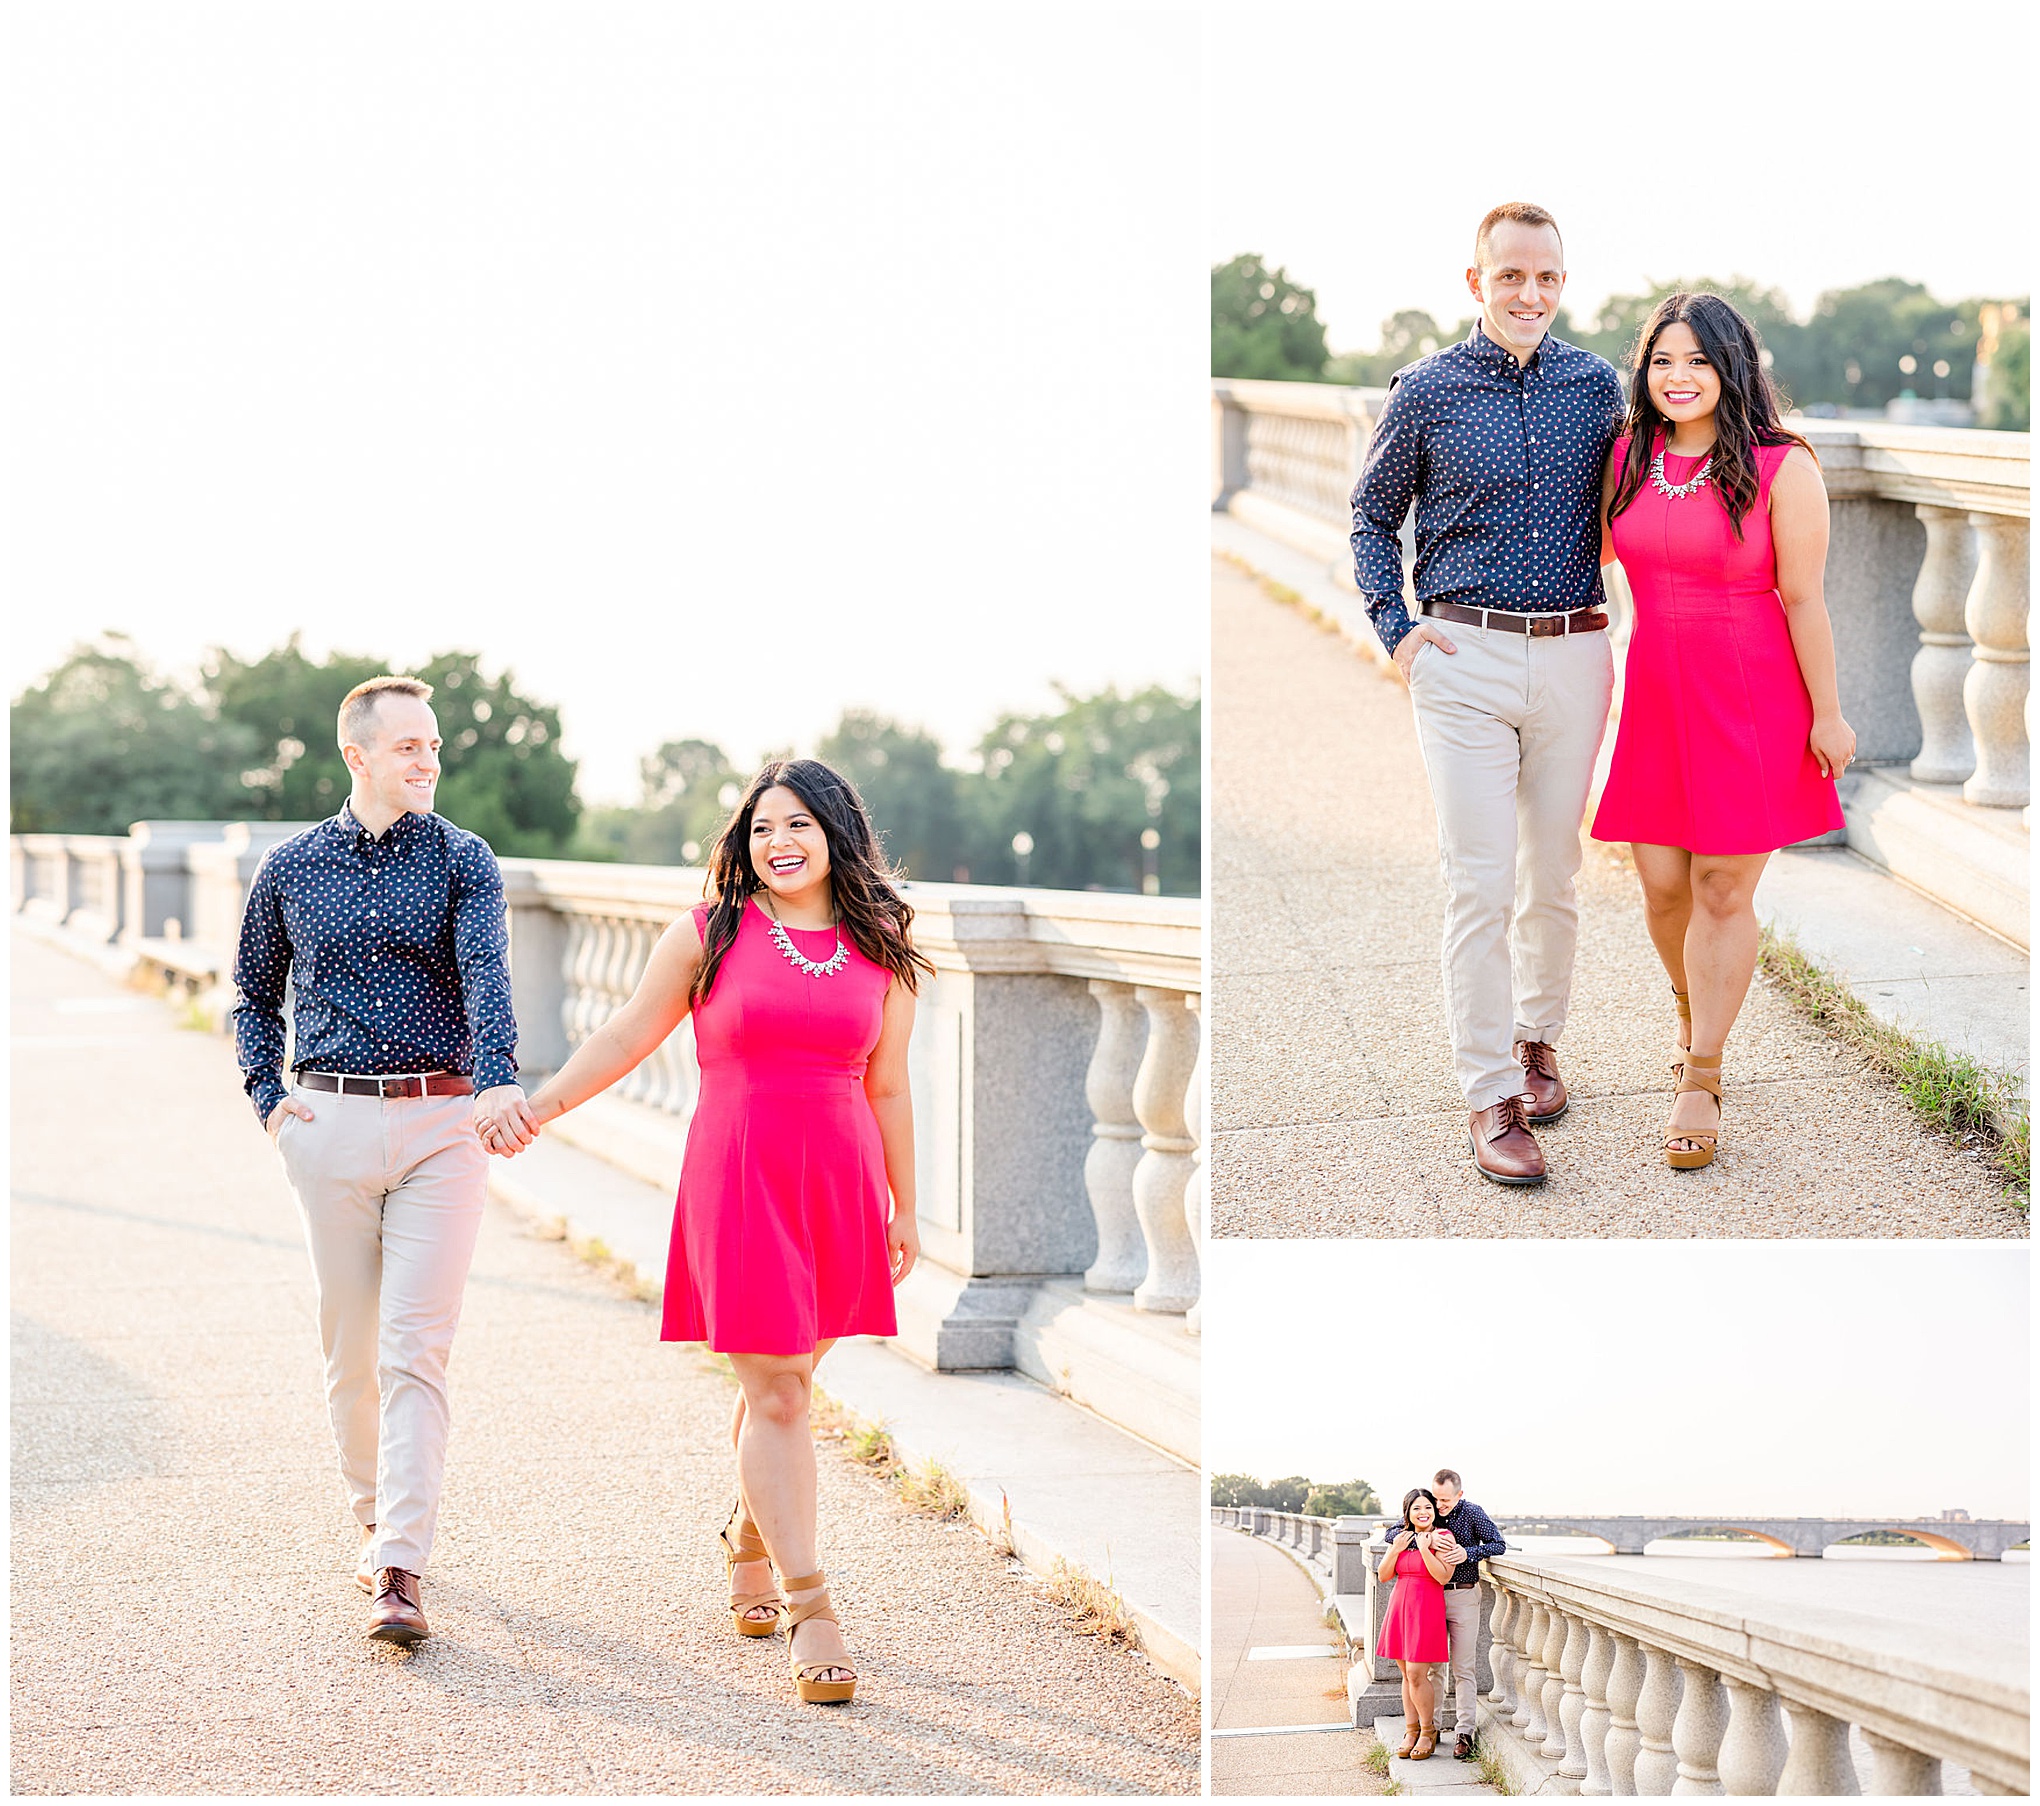 Potomac River walk engagement photos, Washington DC engagement photos, sunrise engagement photos, National Mall engagement photos, National mall portraits, DC portraits, Washington DC photographer, DC engagement photographer, Baltimore engagement photographer, Rachel E.H. Photography, pink dress, couple holding hands, couple walking, man with arm around woman 